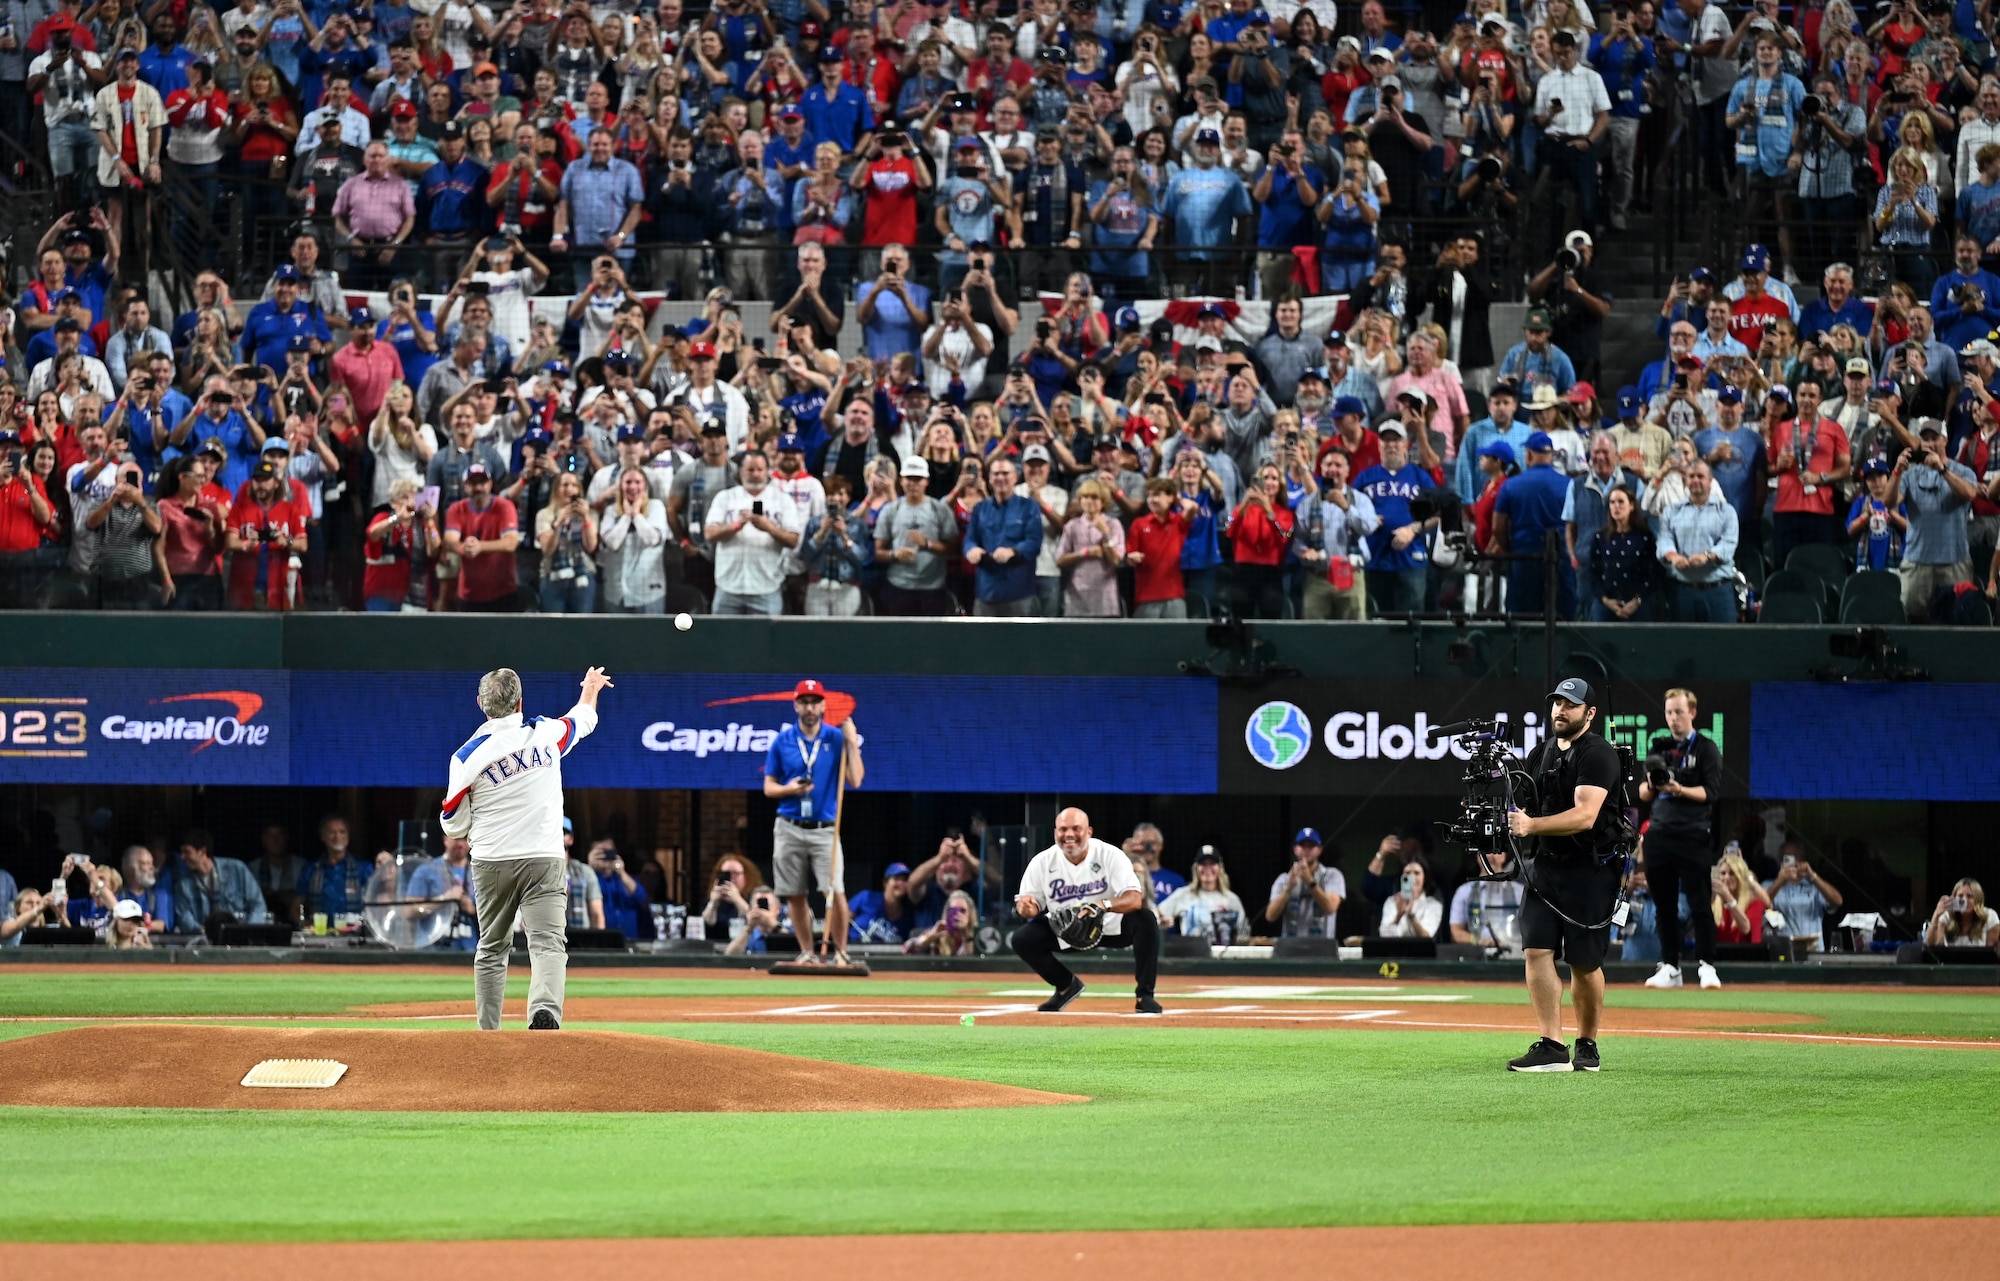 Former President George W. Bush throws the first pitch to Pudge Rodriguez, Baseball Hall of Fame member and former Texas Ranger, during the pre-game ceremony at the World Series opening game at Globe Life Field in Arlington, Texas, Oct. 27, 2023. The presidential first pitch is a baseball tradition dating back to former President William Howard Taft throwing the first pitch at the Washington Senator’s opening day game at Griffith Stadium in 1910. (U.S. Air Force photo by Staff Sgt. Holly Cook)